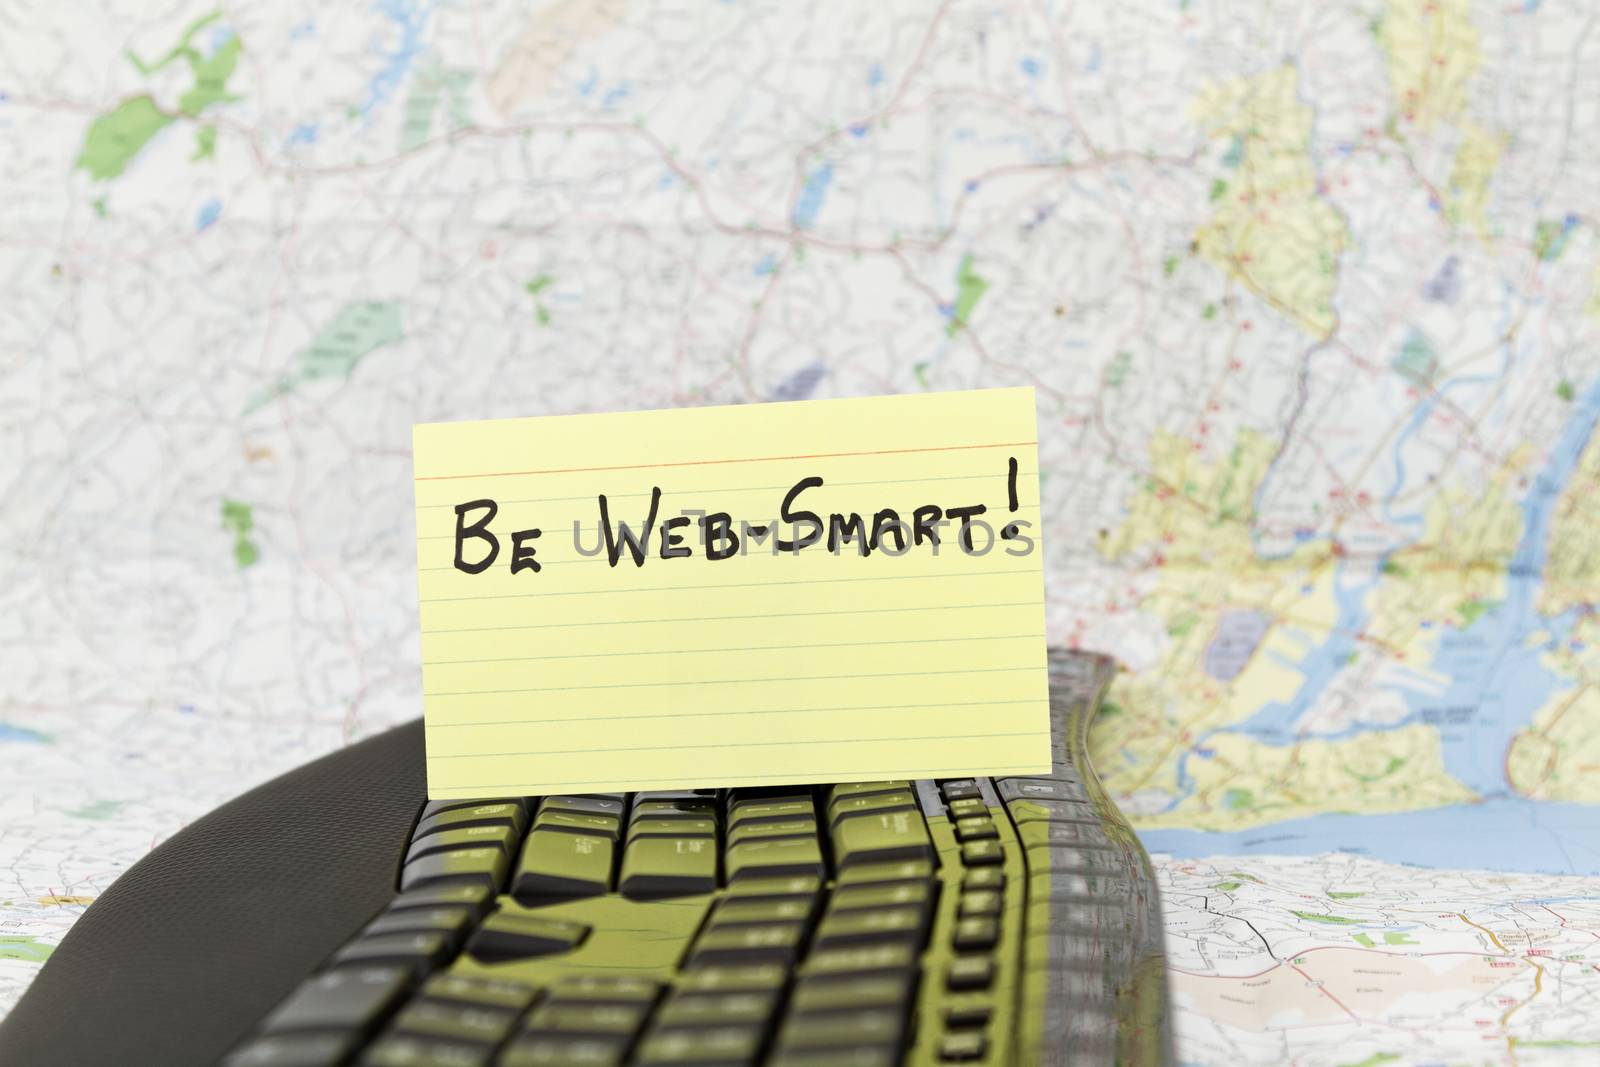 Be Web-Smart note written on yellow note card placed on black keyboard.  Map background.  Focus on technology warning phrase for Internet users.  Depicts need for smart tech behavior to be secure and avoid worldwide threats of virus and hacking.  Wise warning for personal computing, business, banking, government, schools, and any agency connected to today's technology. 